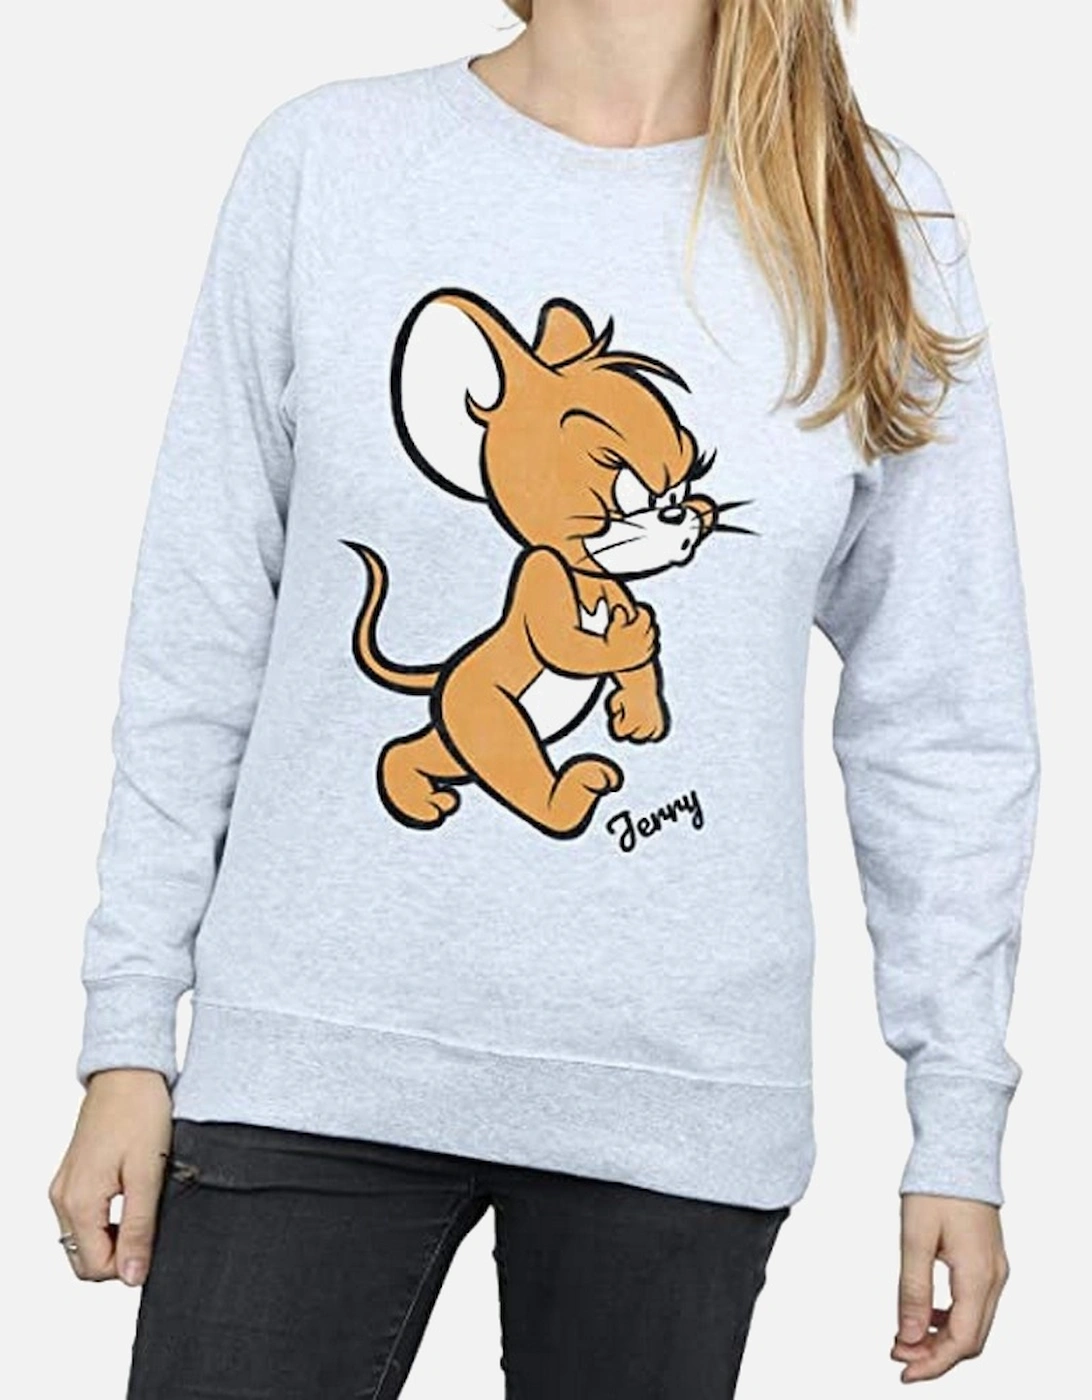 Tom and Jerry Womens/Ladies Angry Mouse Sweatshirt